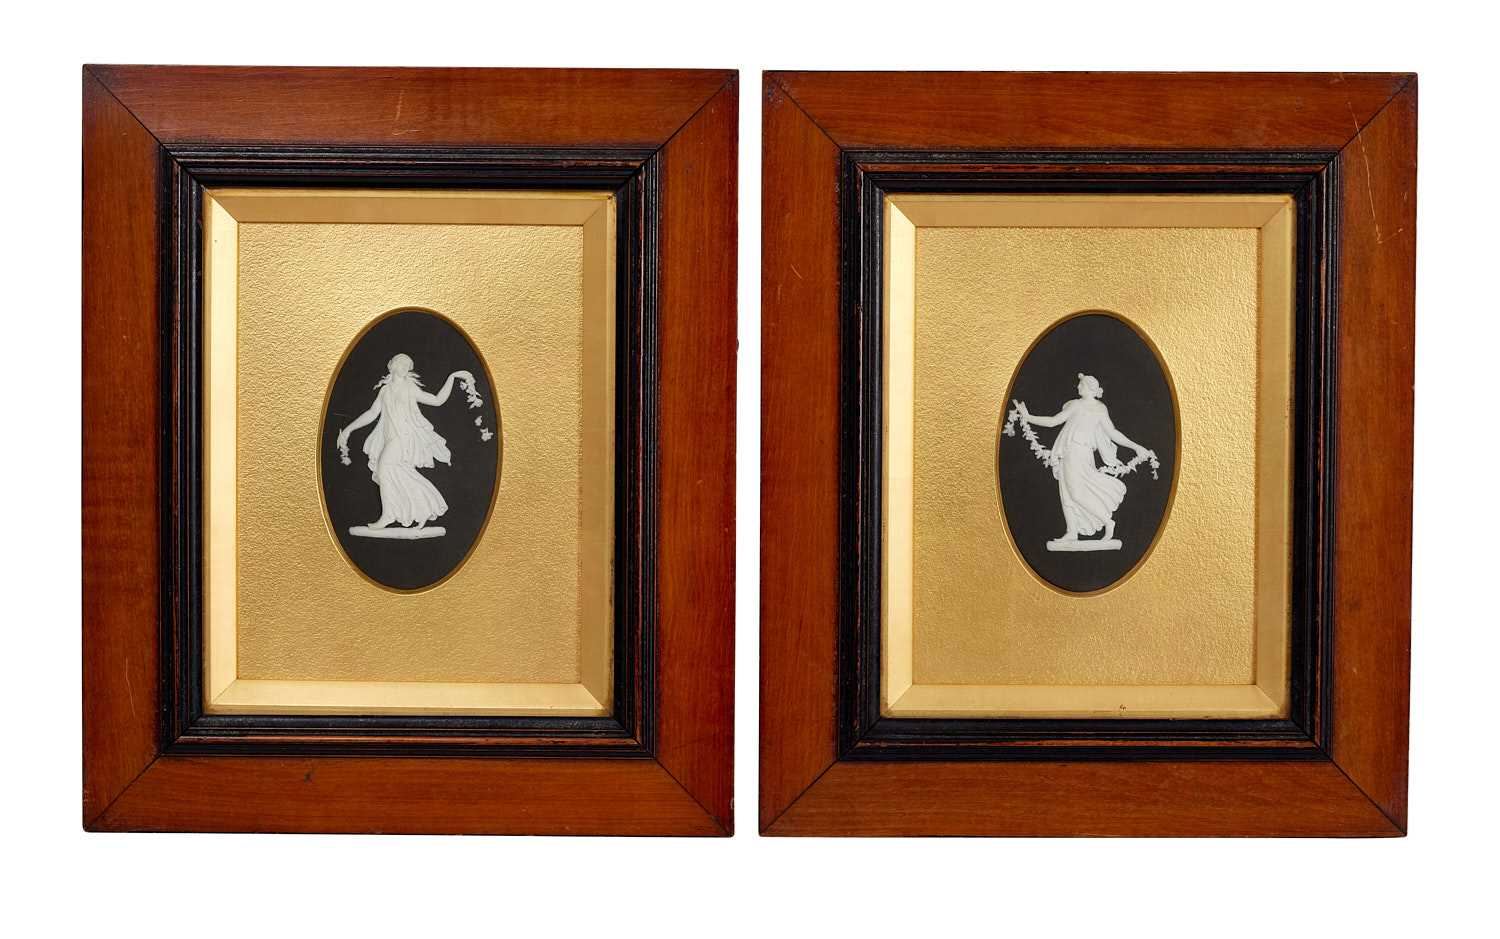 A PAIR OF 19TH CENTURY WEDGWOOD JASPER RELIEFS IN FRAMES